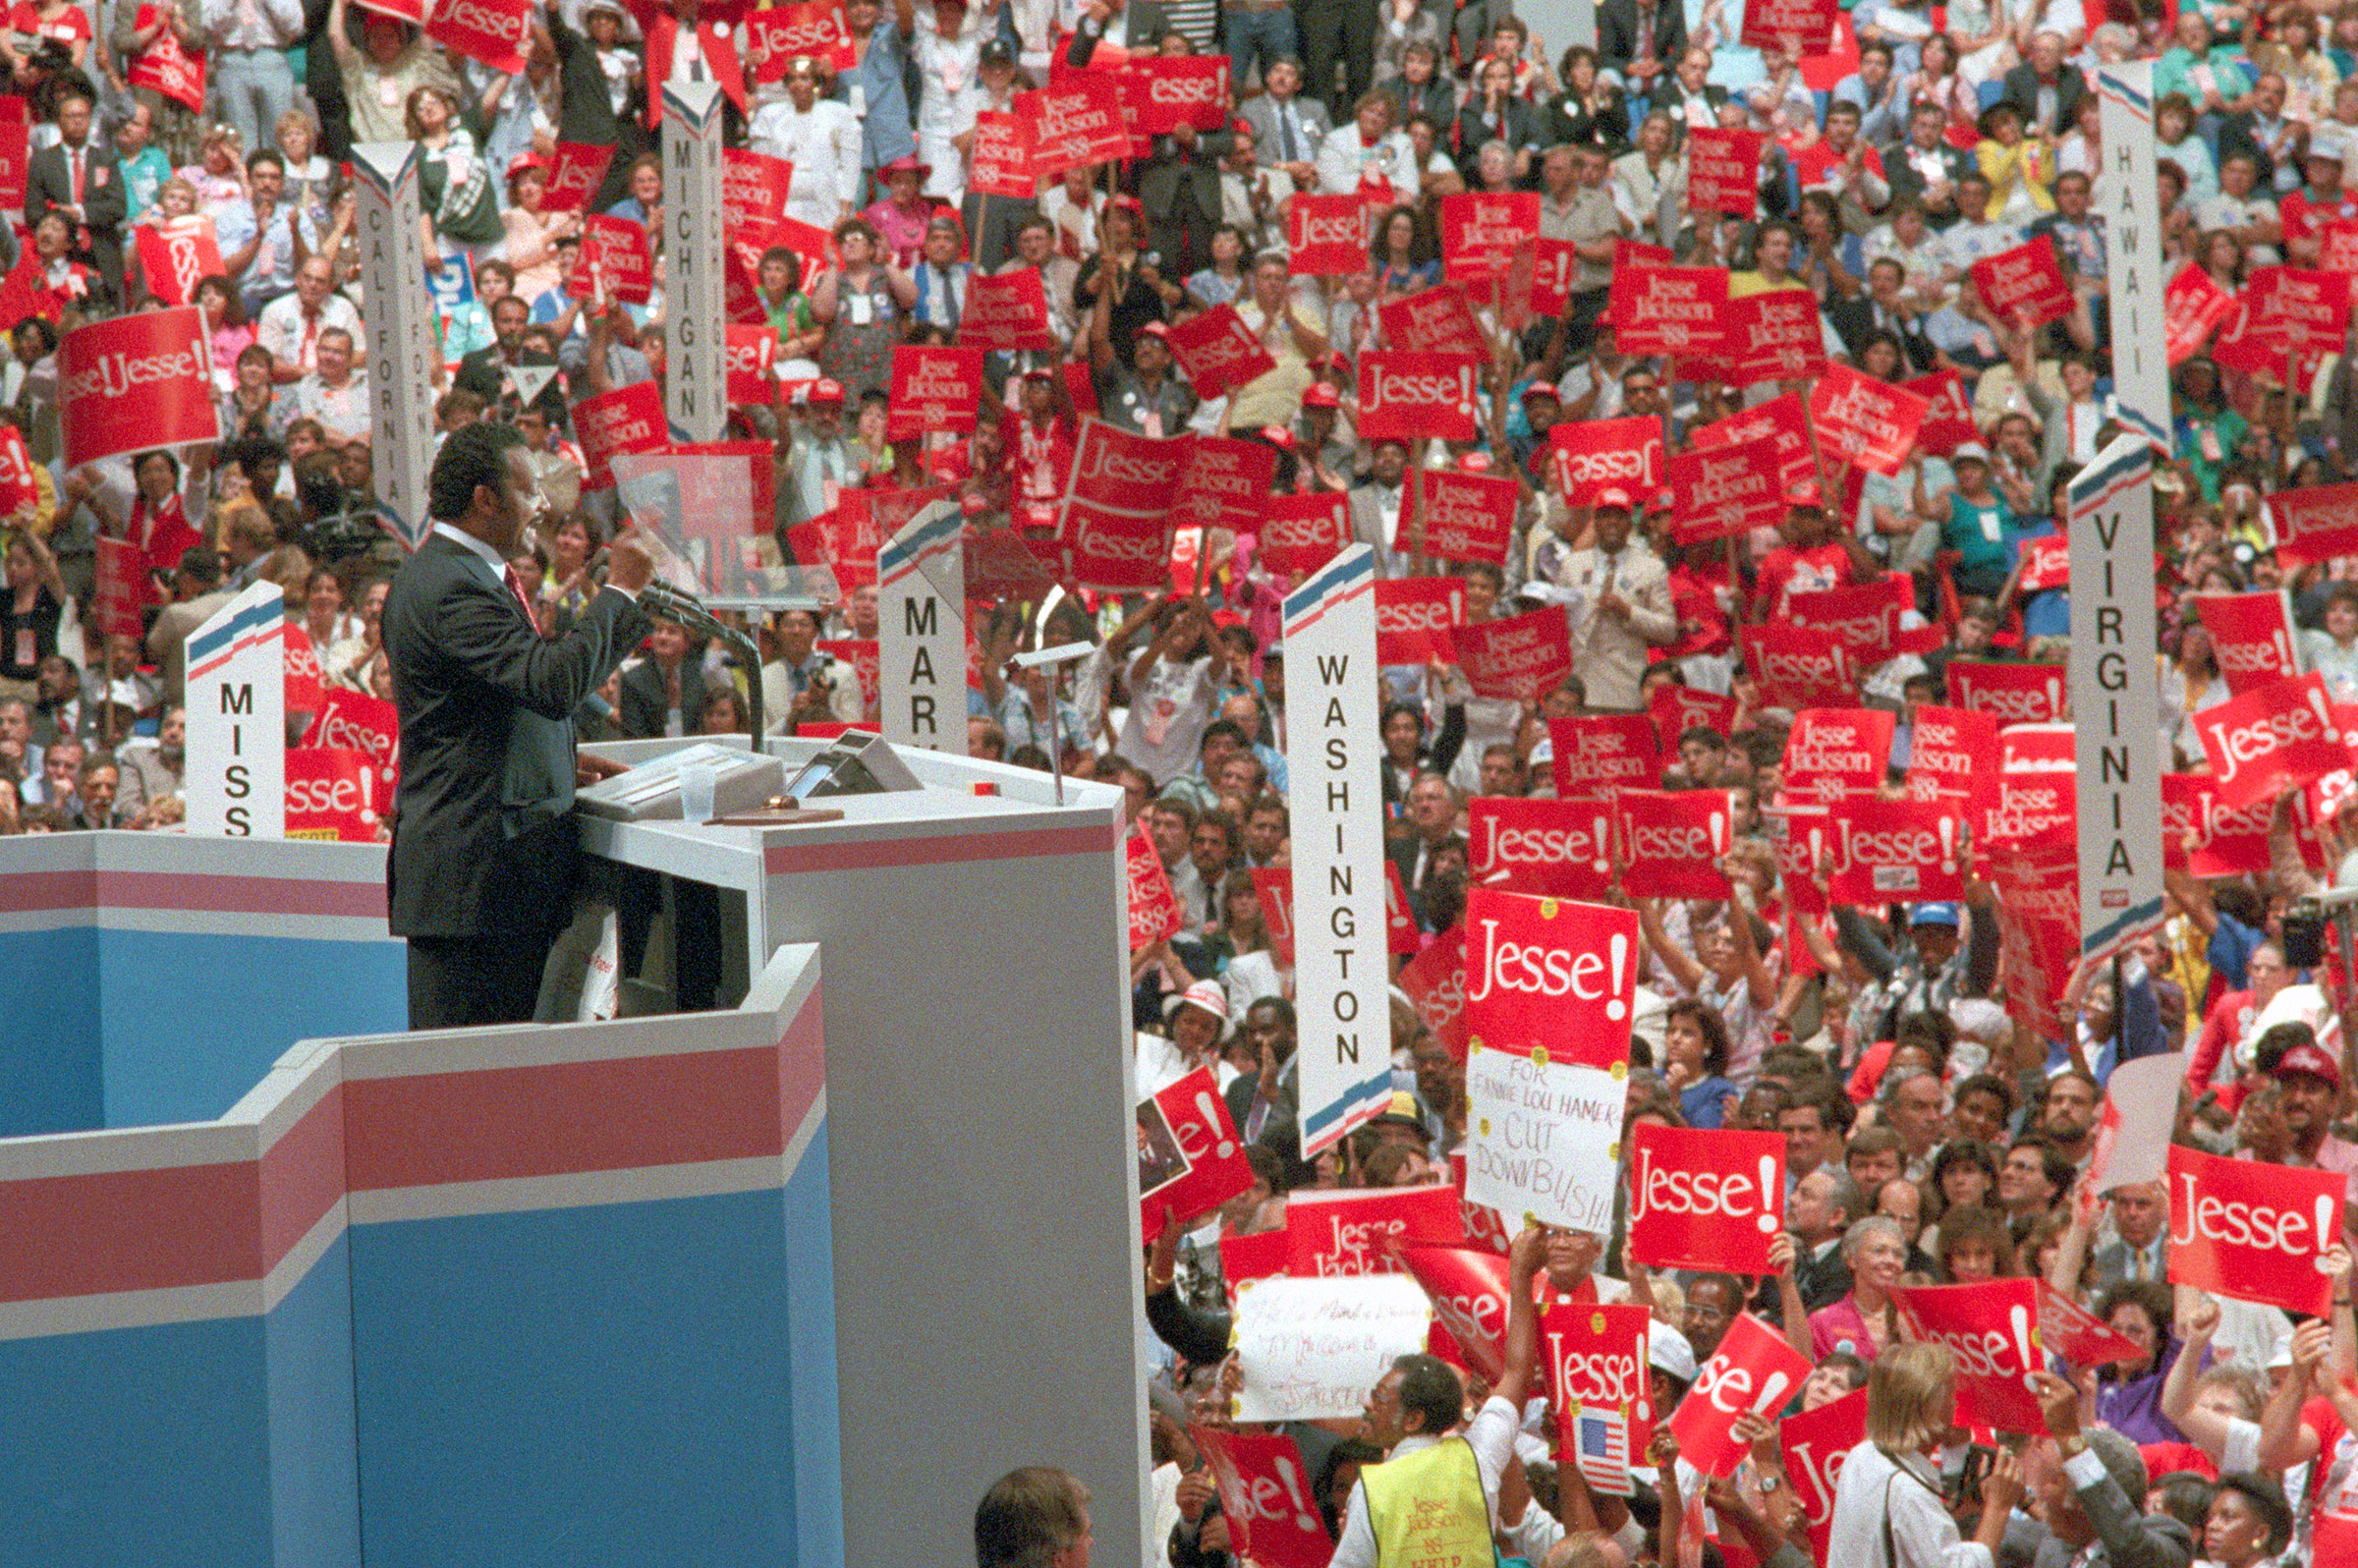 Jackson addresses the Democratic National Convention on July 19, 1988. (Bettmann Archive/Getty Images)